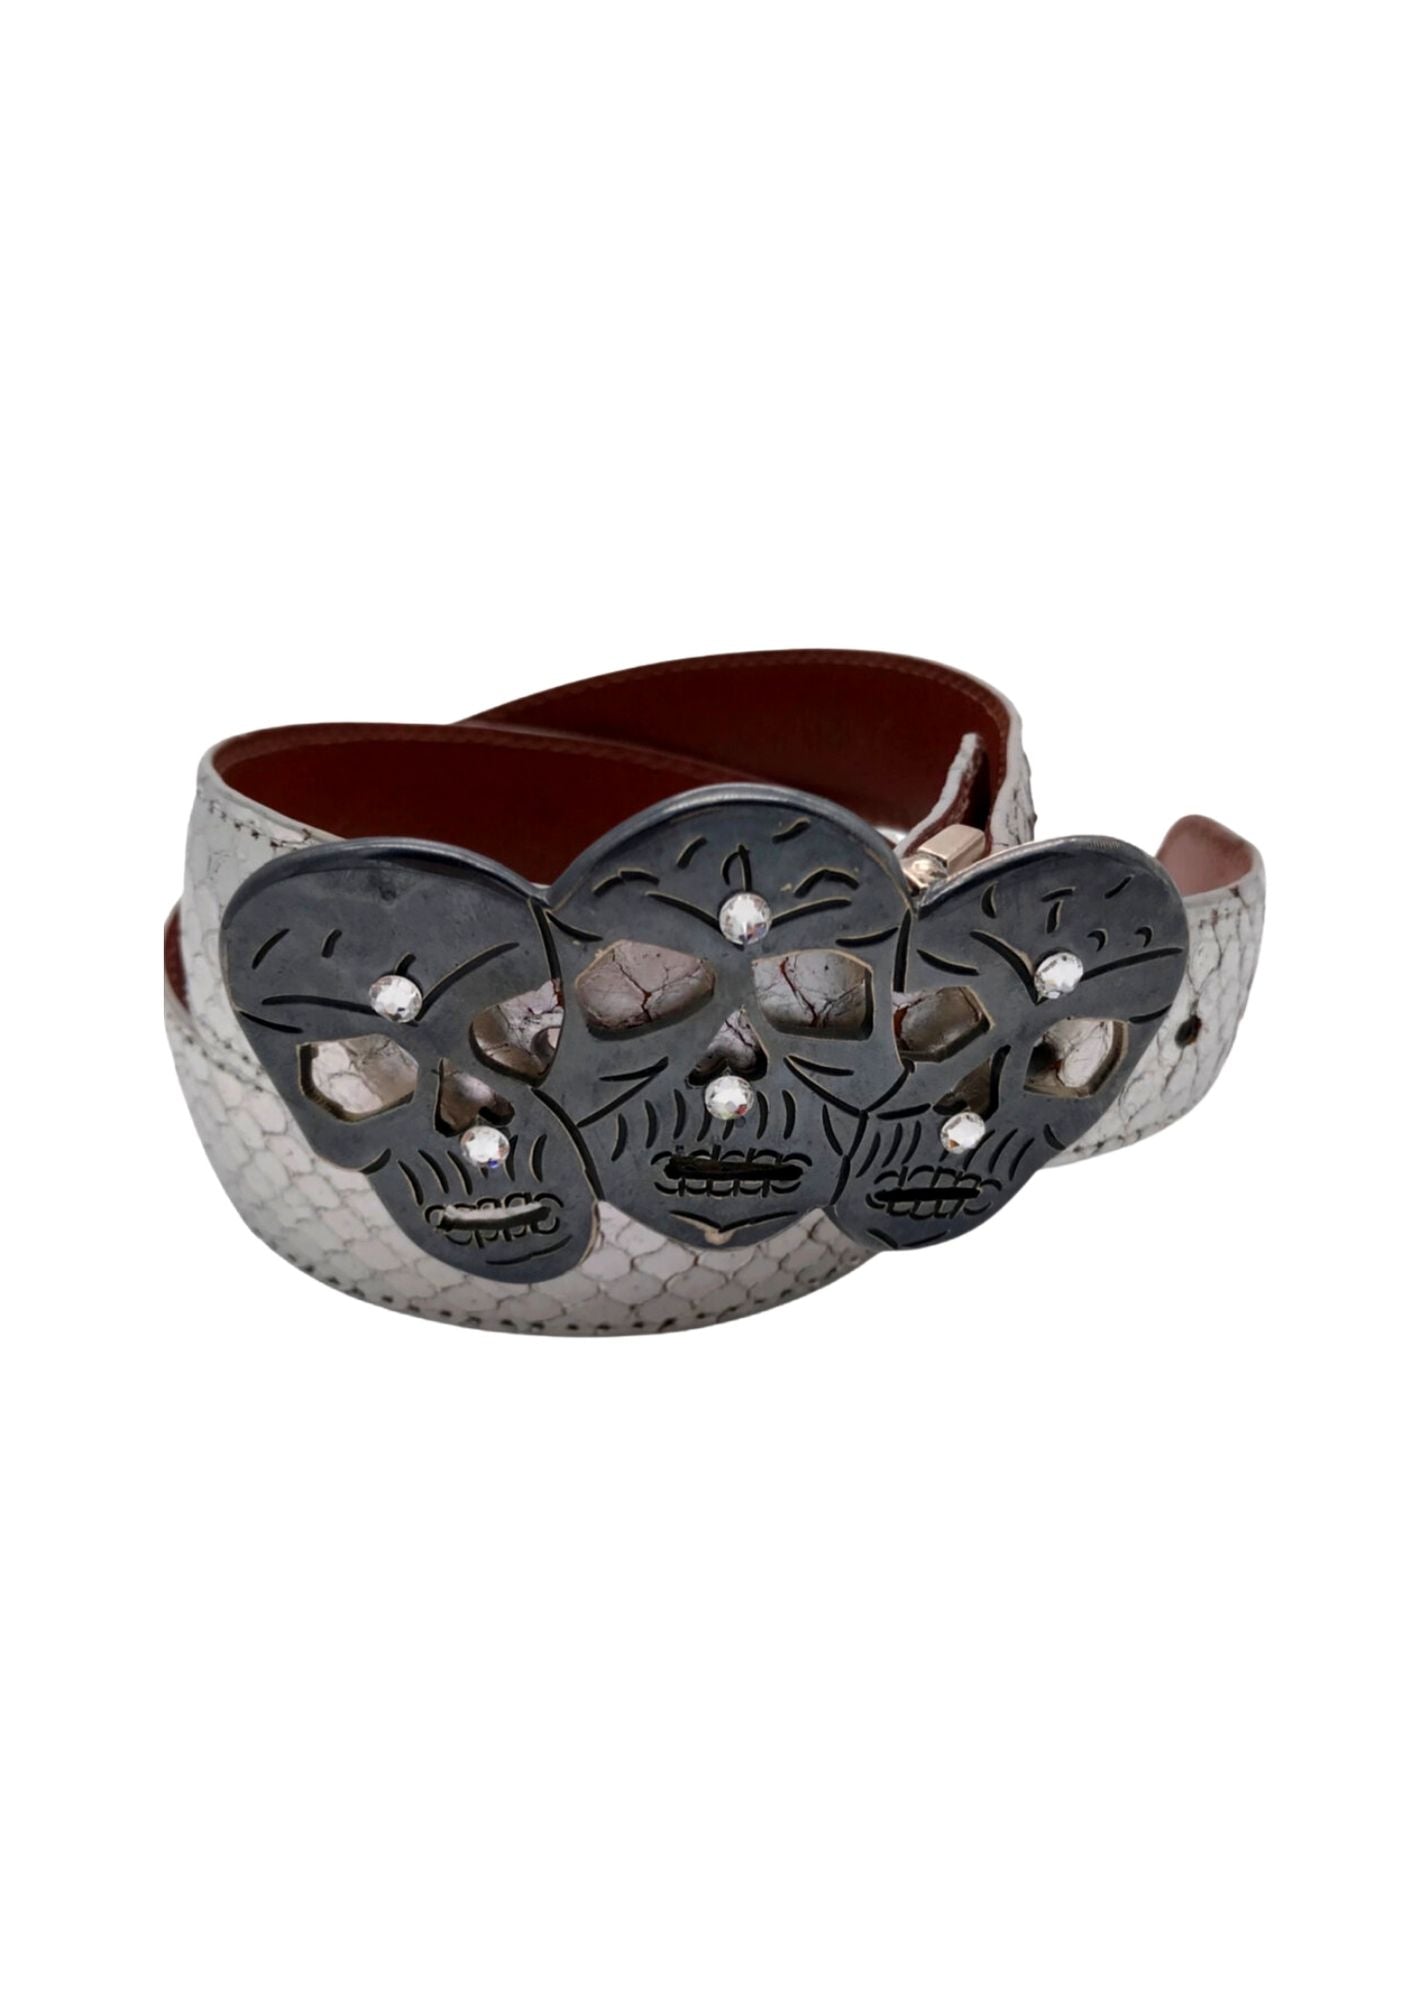 Pat Areias Sterling Silver Oxidized Three Skull Belt Buckle M733